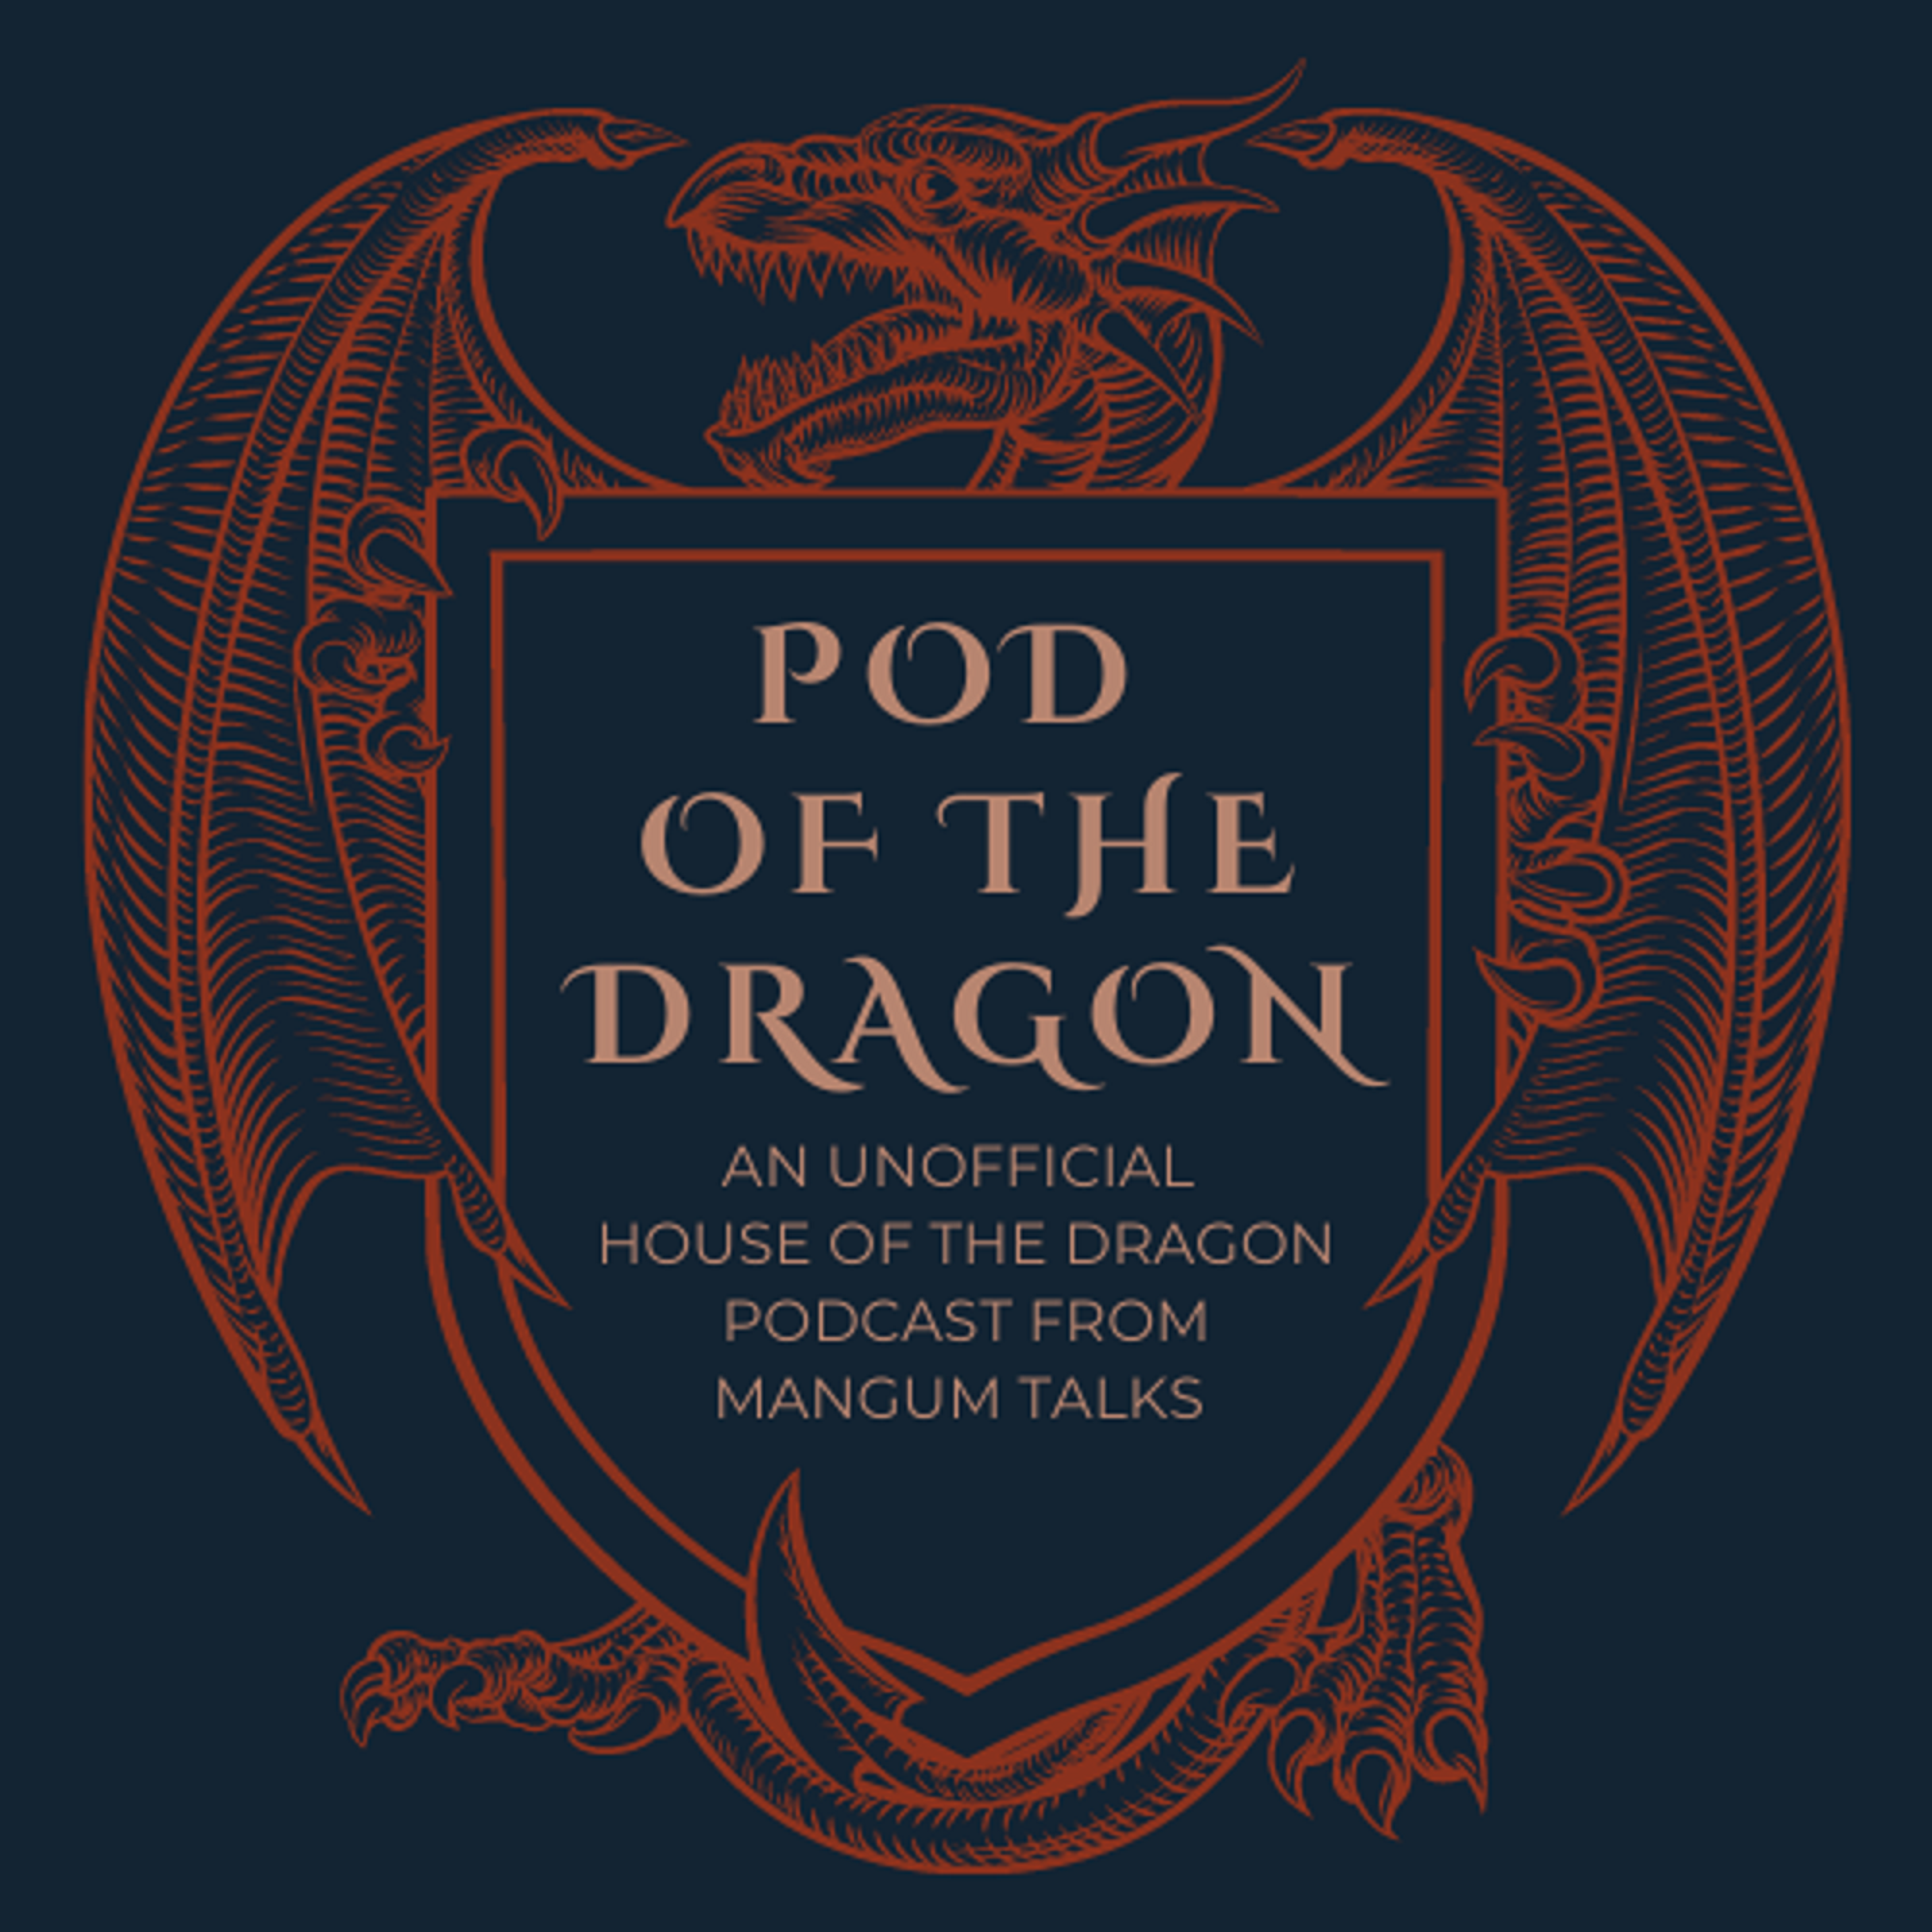 Artwork for podcast Pod of the Dragon